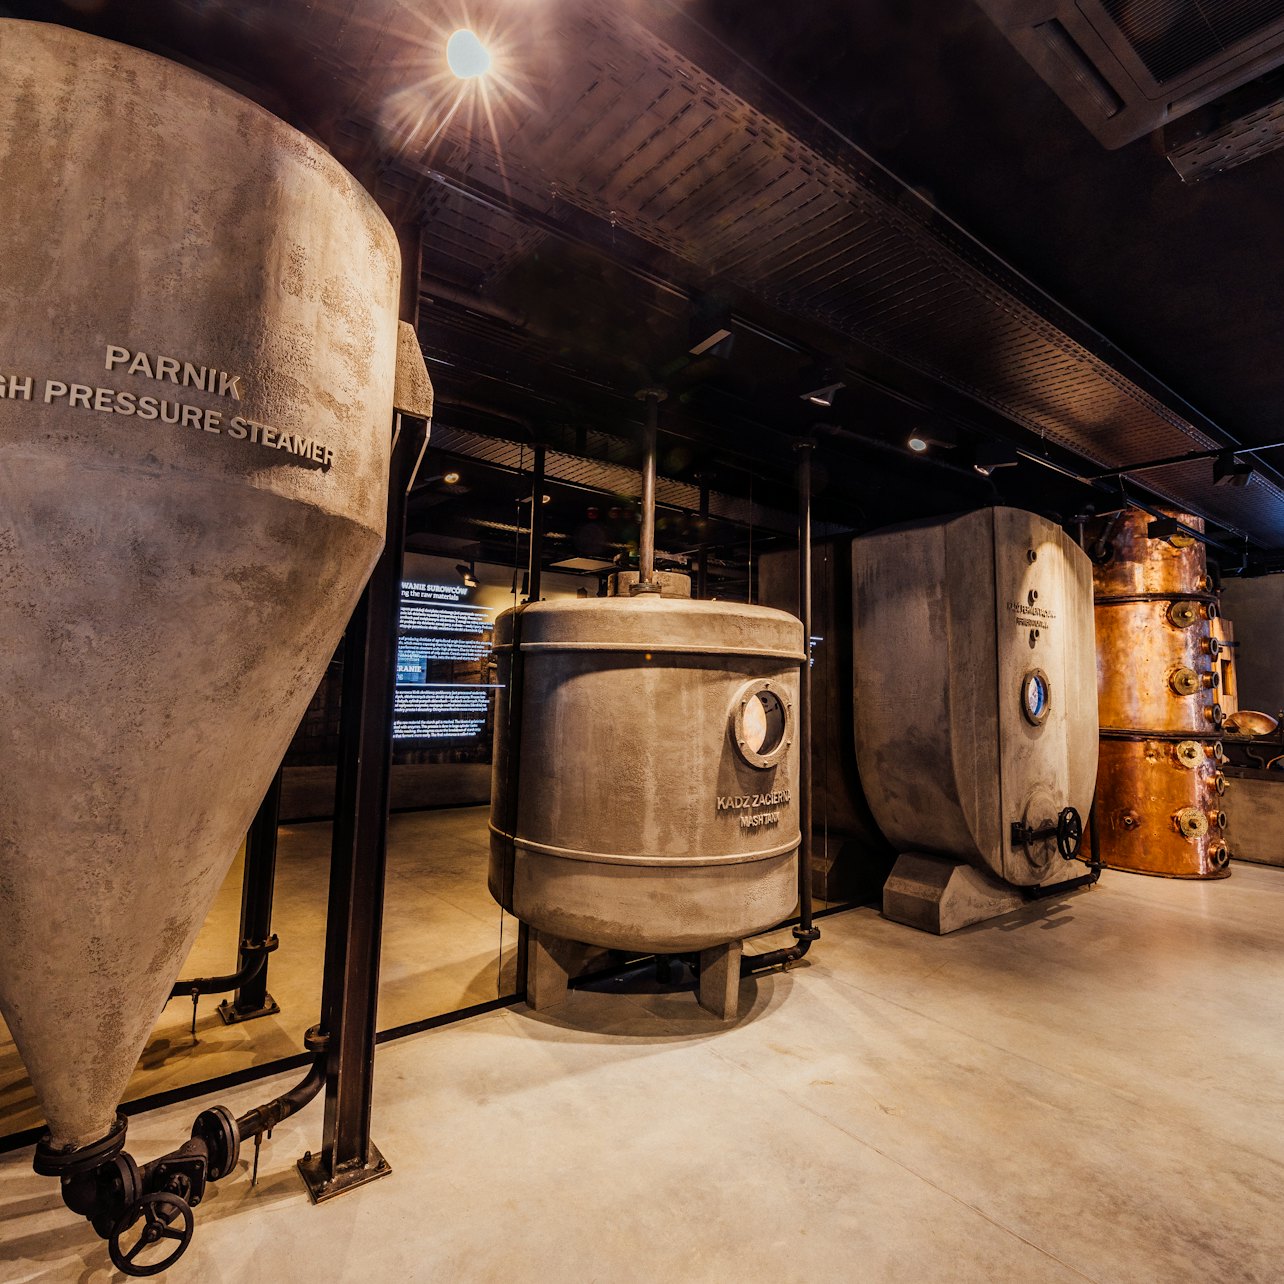 Polish Vodka Museum: Guided Tour + Tasting of 3 Vodkas - Accommodations in Warsaw